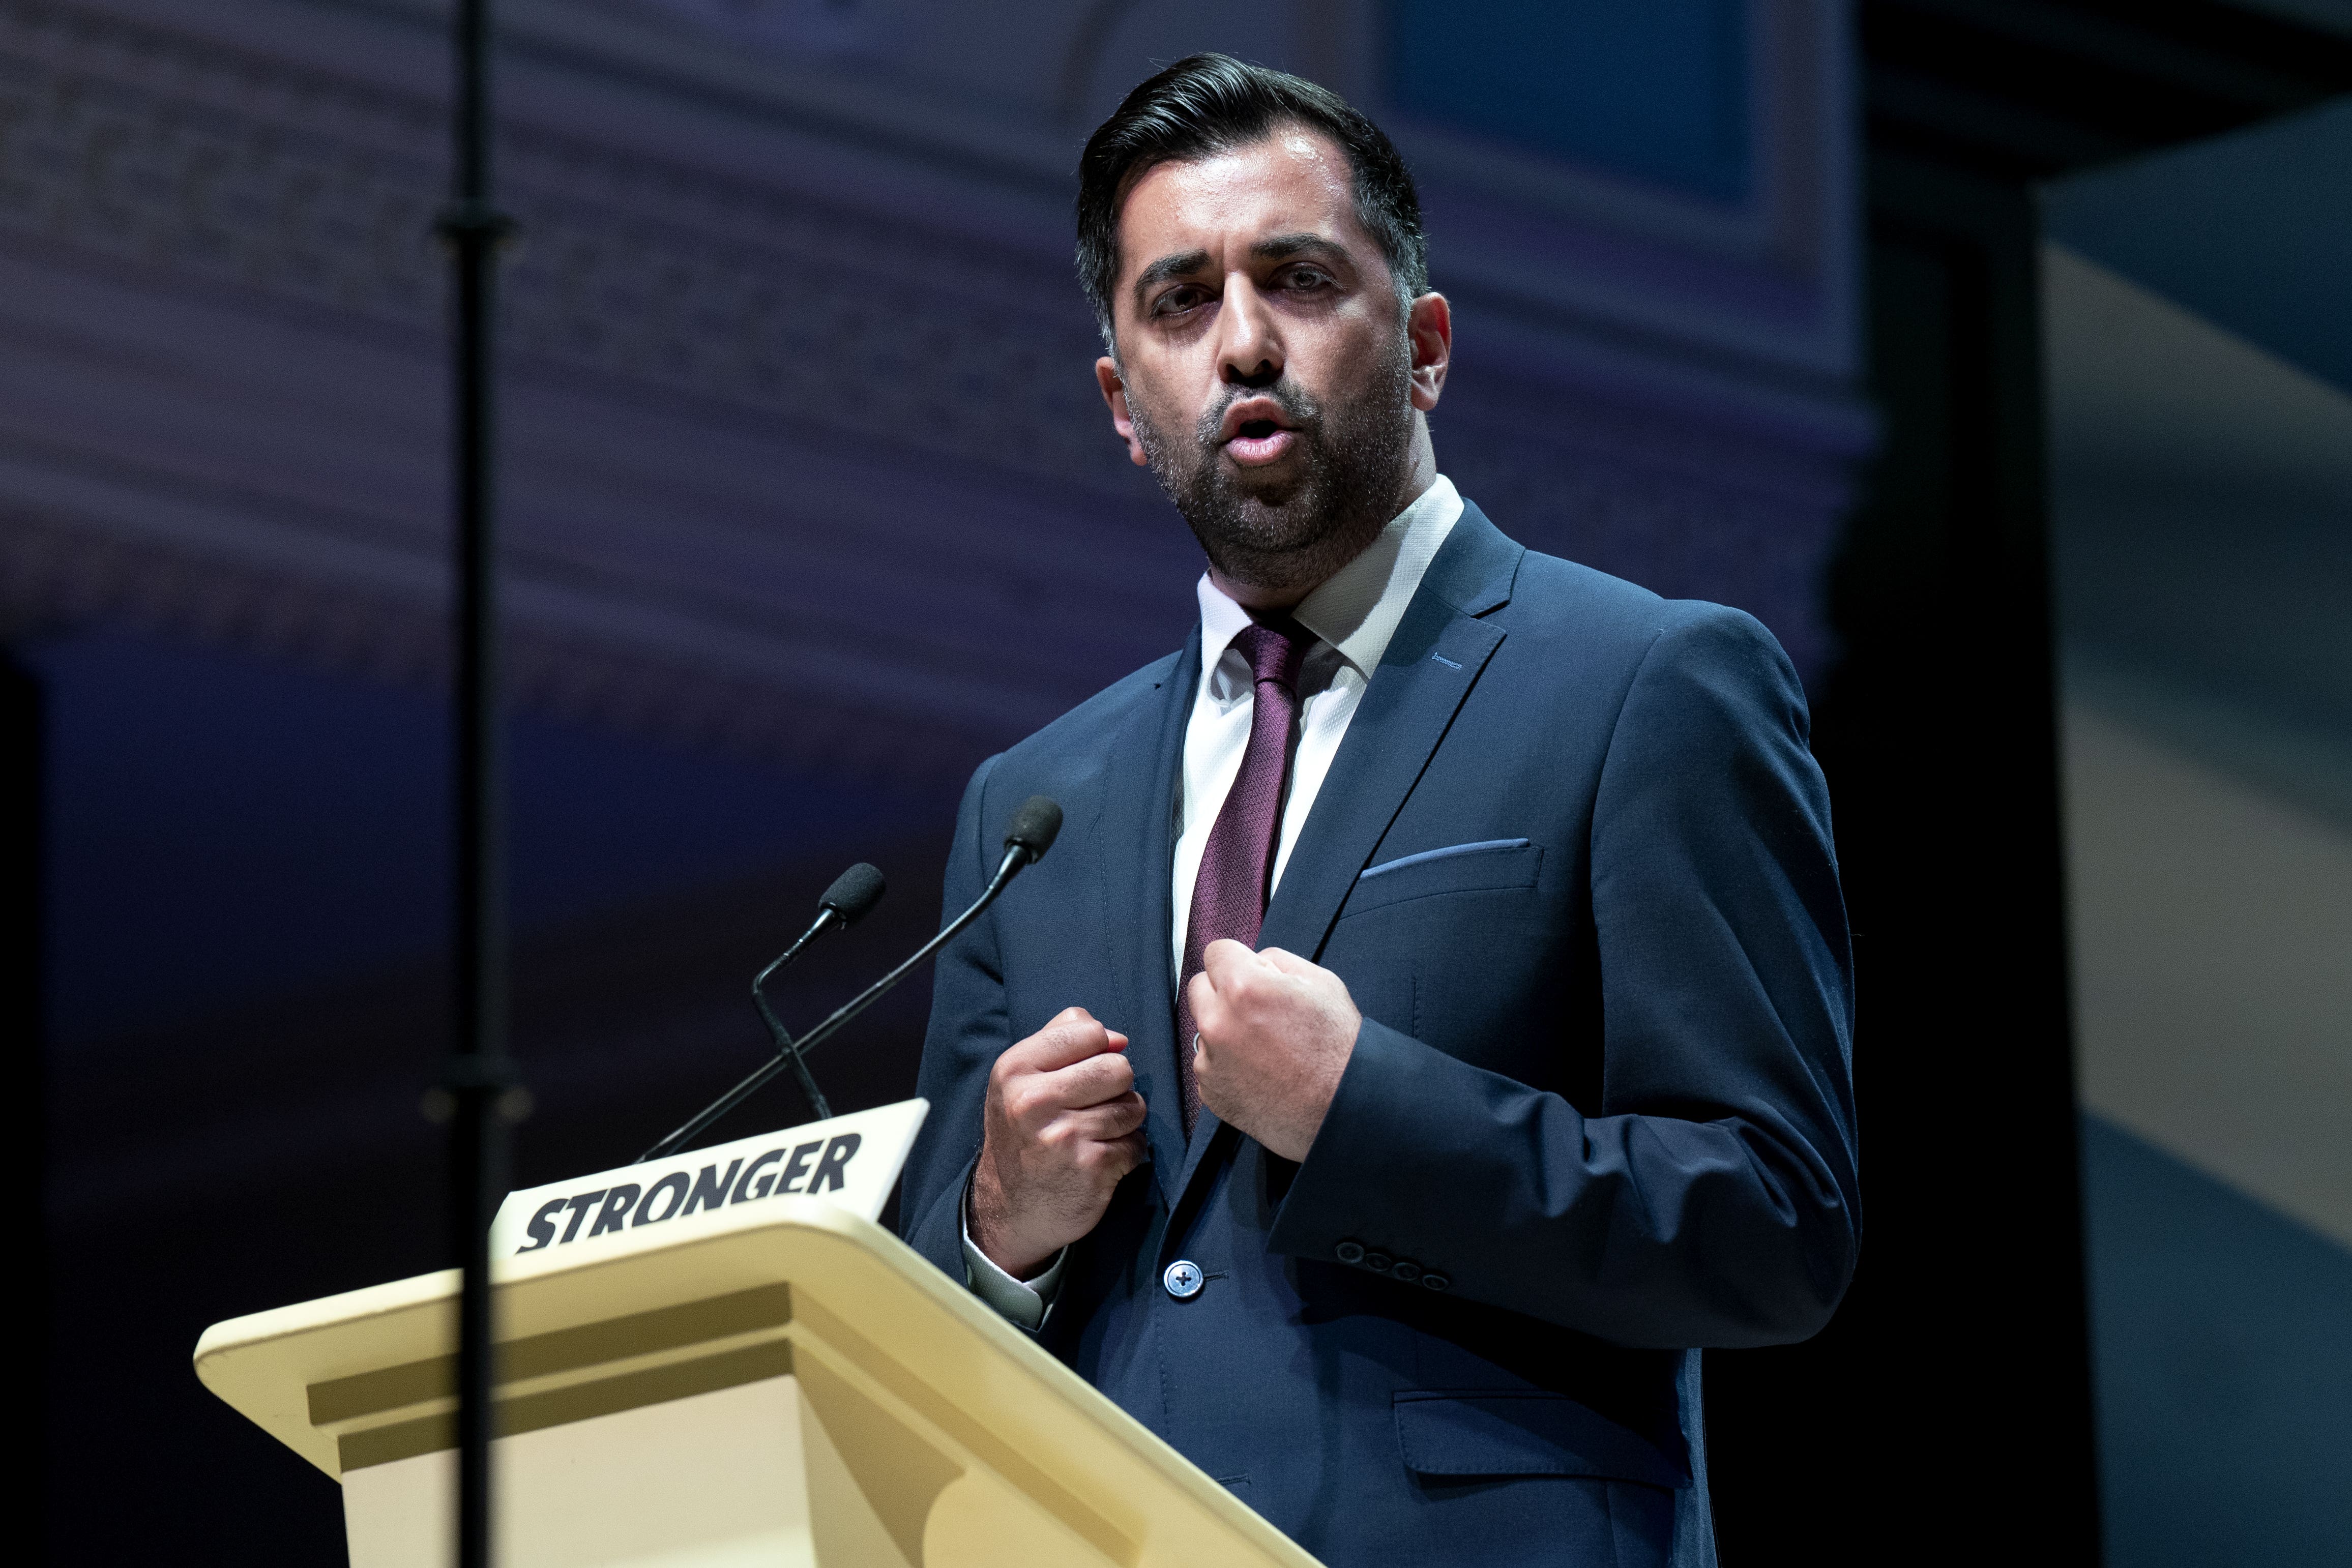 Humza Yousaf’s personal ratings have improved in recent weeks